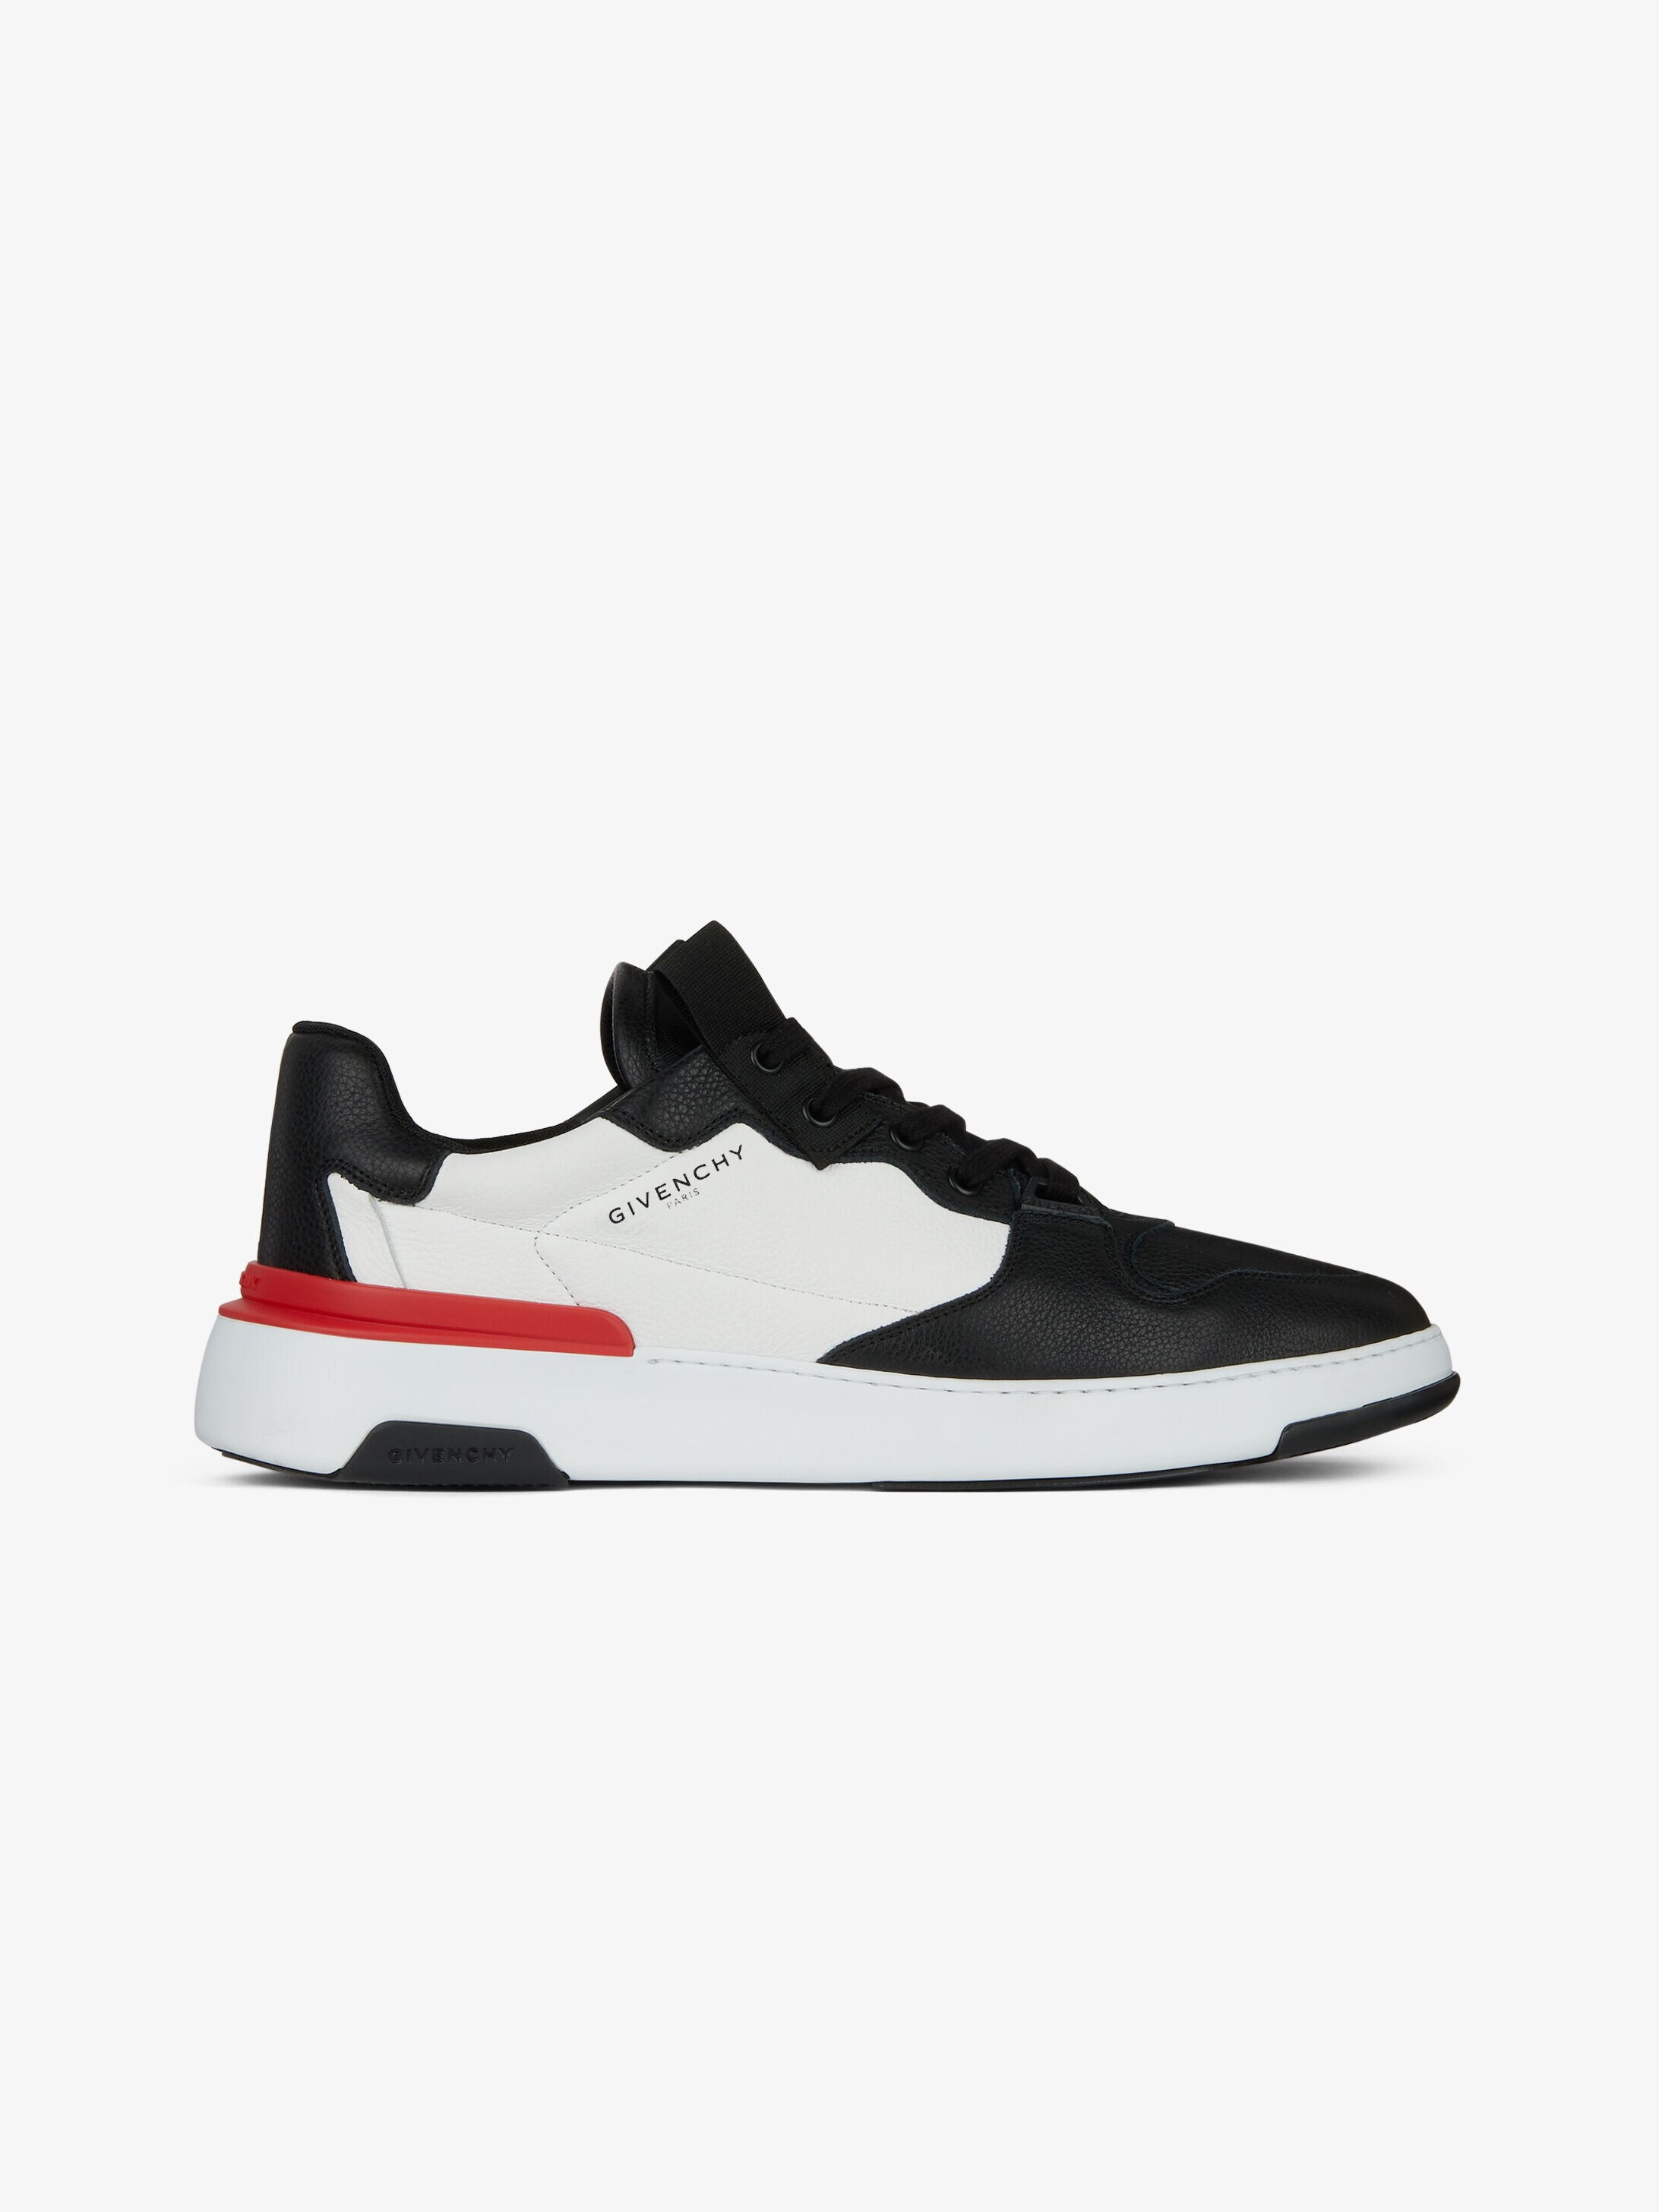 Givenchy Mens Sneakers Size Chart